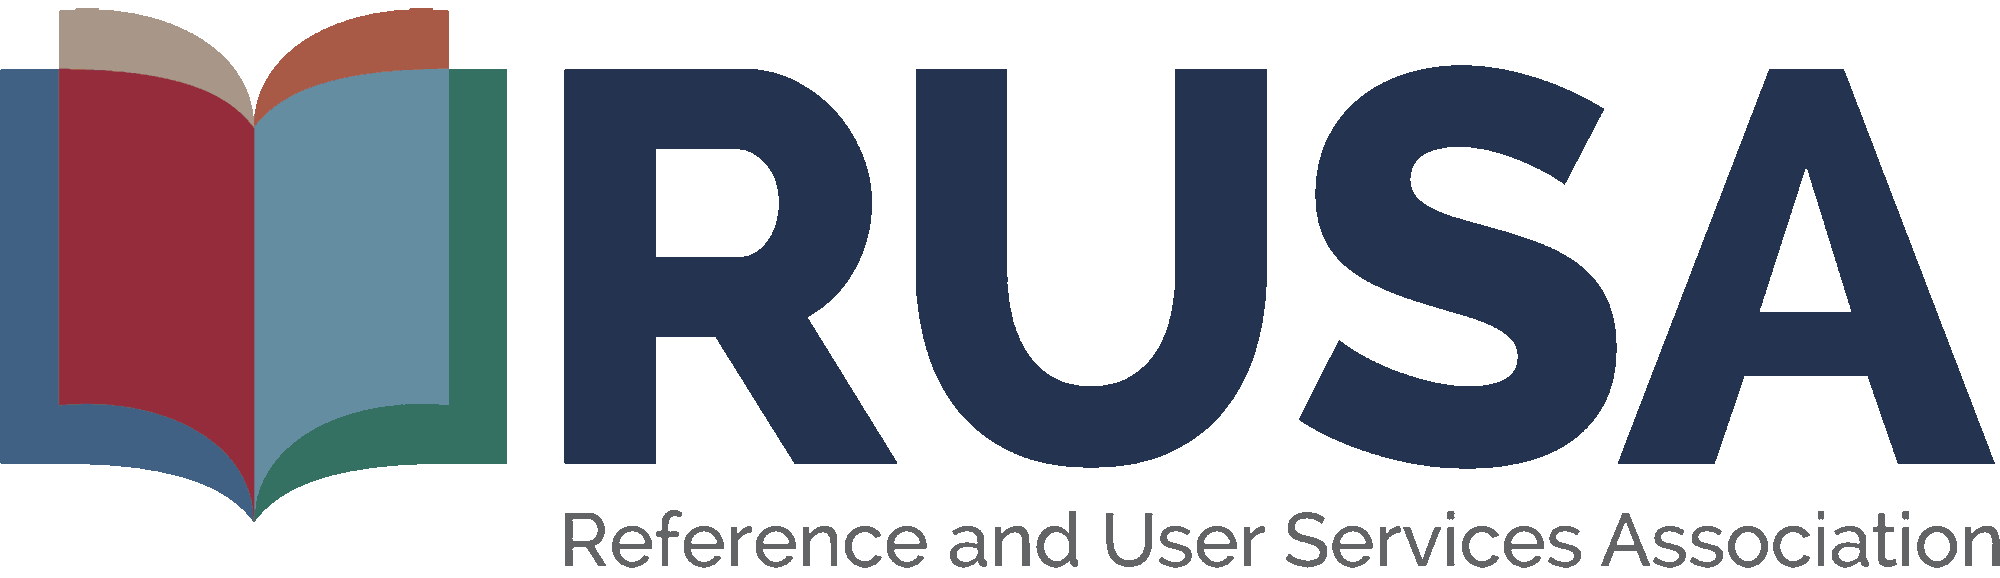 Reference.com Logo - Reference & User Services Association (RUSA) |